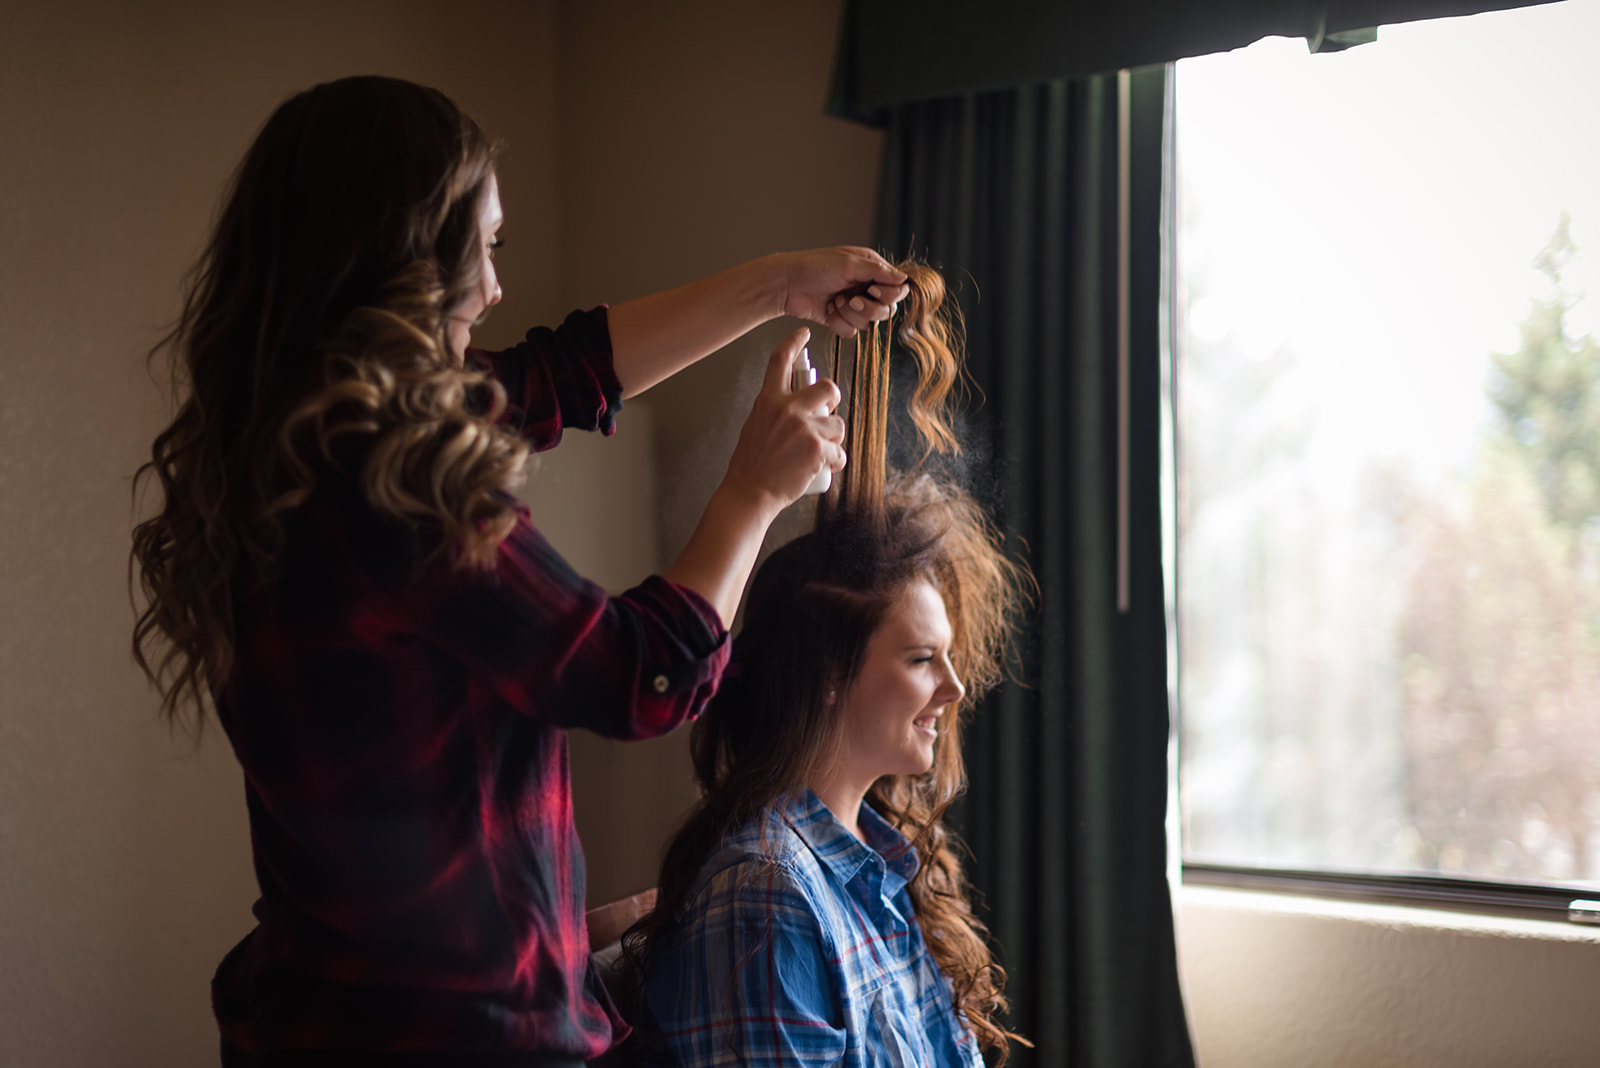 the bride has her hair done by one of her bridesmaids